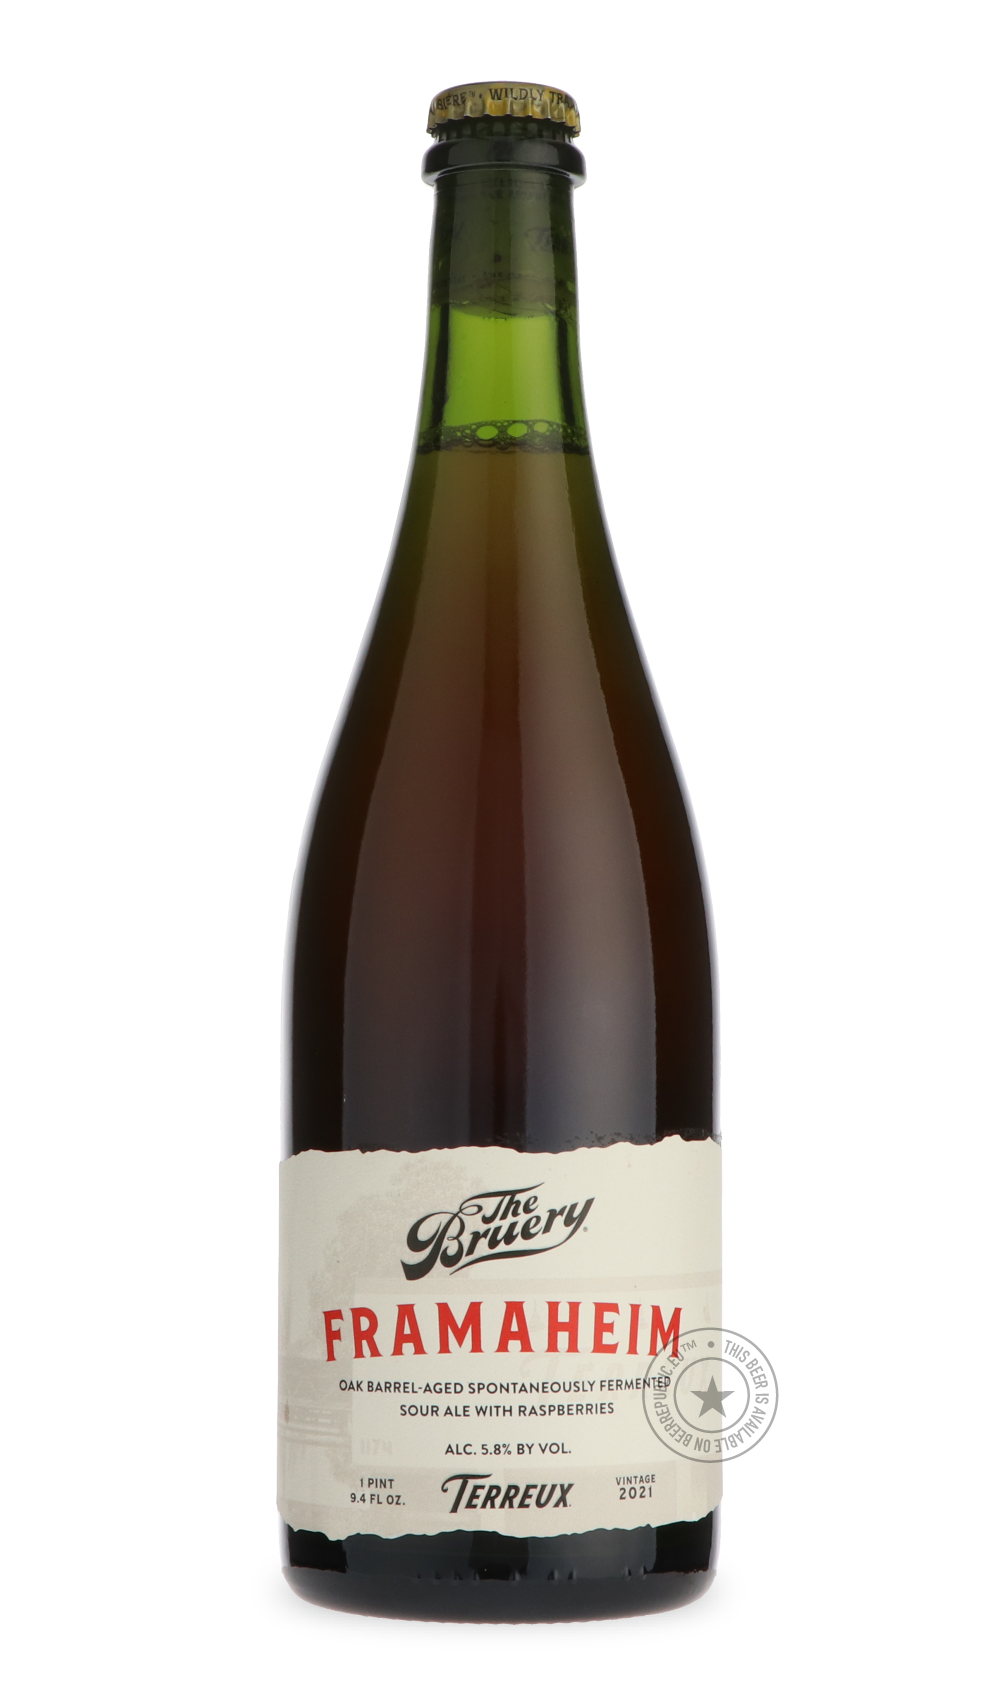 -The Bruery- Terreux Framaheim-Sour / Wild & Fruity- Only @ Beer Republic - The best online beer store for American & Canadian craft beer - Buy beer online from the USA and Canada - Bier online kopen - Amerikaans bier kopen - Craft beer store - Craft beer kopen - Amerikanisch bier kaufen - Bier online kaufen - Acheter biere online - IPA - Stout - Porter - New England IPA - Hazy IPA - Imperial Stout - Barrel Aged - Barrel Aged Imperial Stout - Brown - Dark beer - Blond - Blonde - Pilsner - Lager - Wheat - We